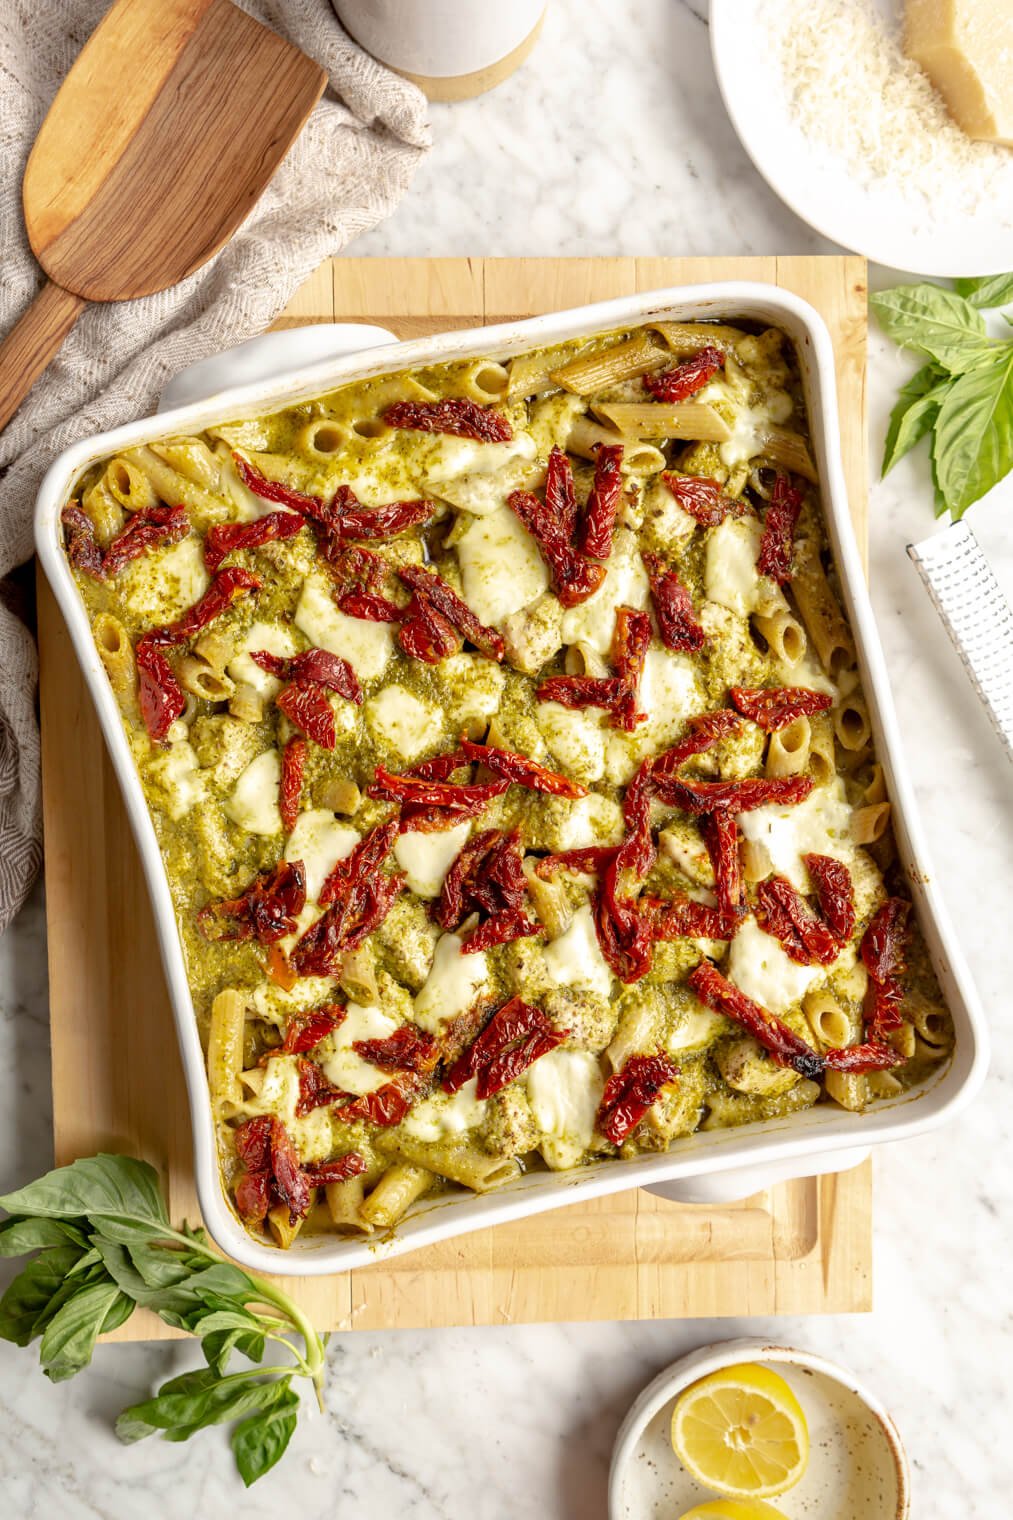 Top down view of white, square casserole dish with pesto pasta topped with sun-dried tomatoes and mozzarella on a wooden cutting board.